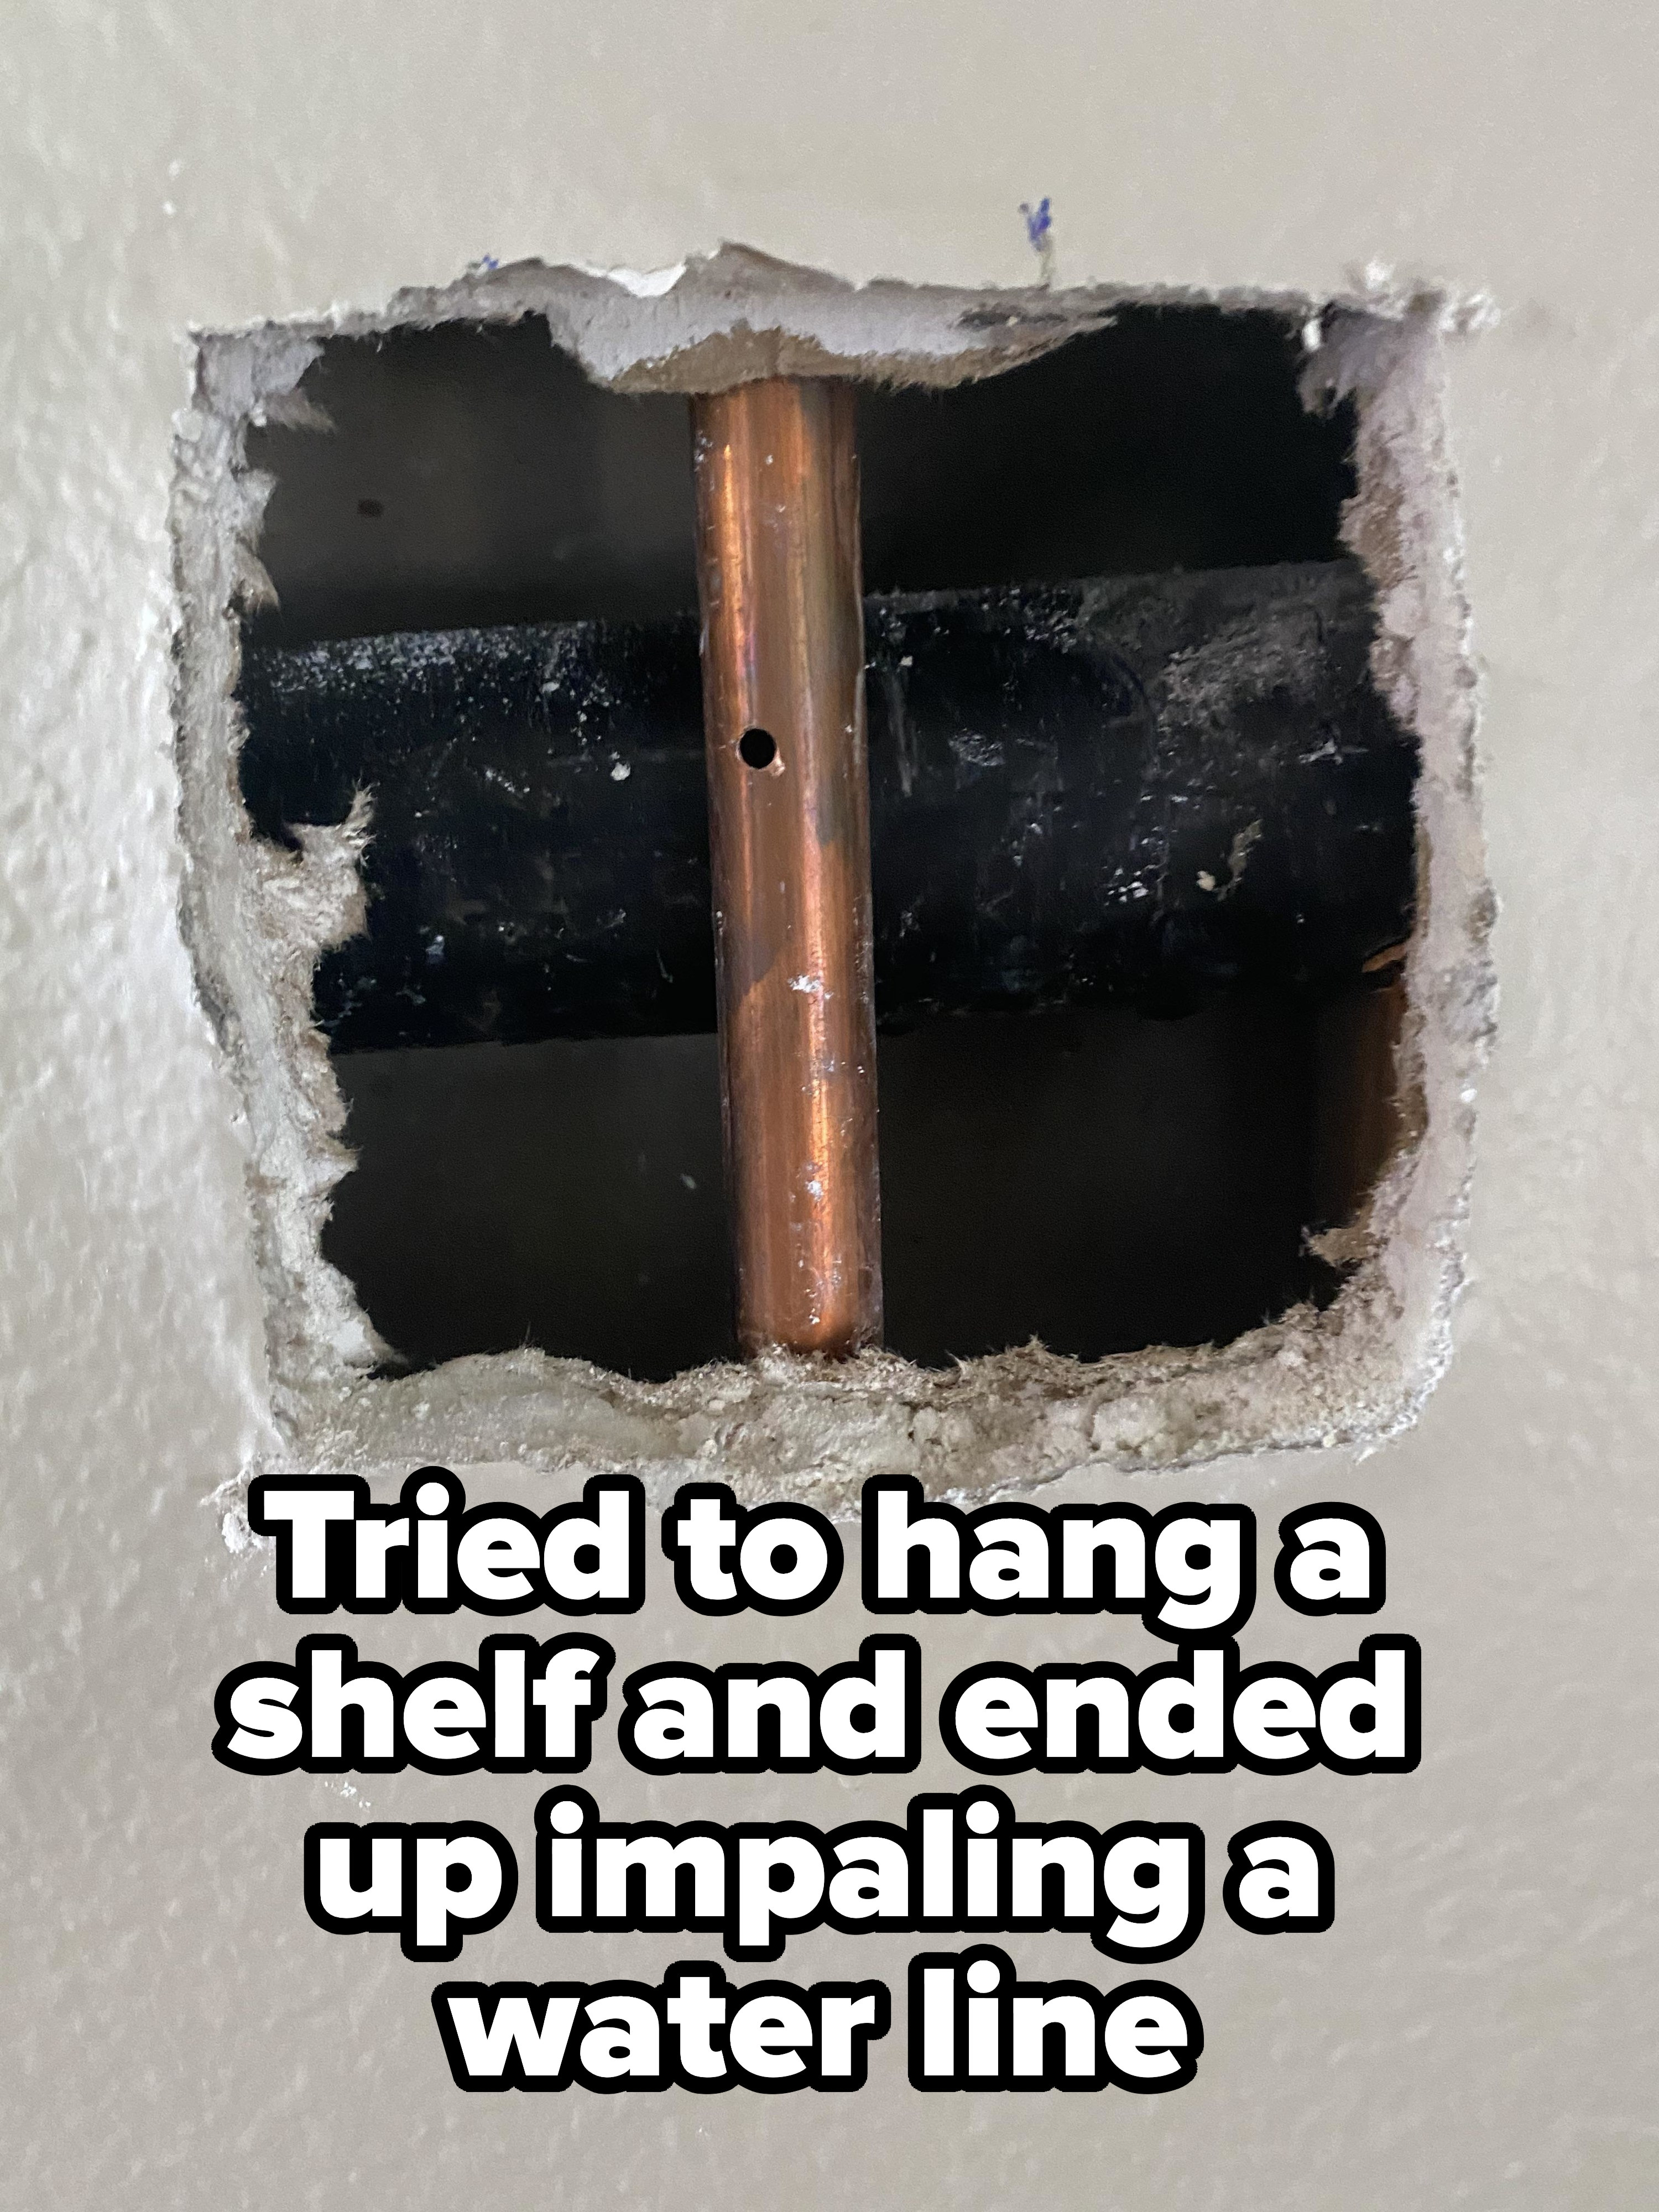 A hole in the wall exposing a pipe